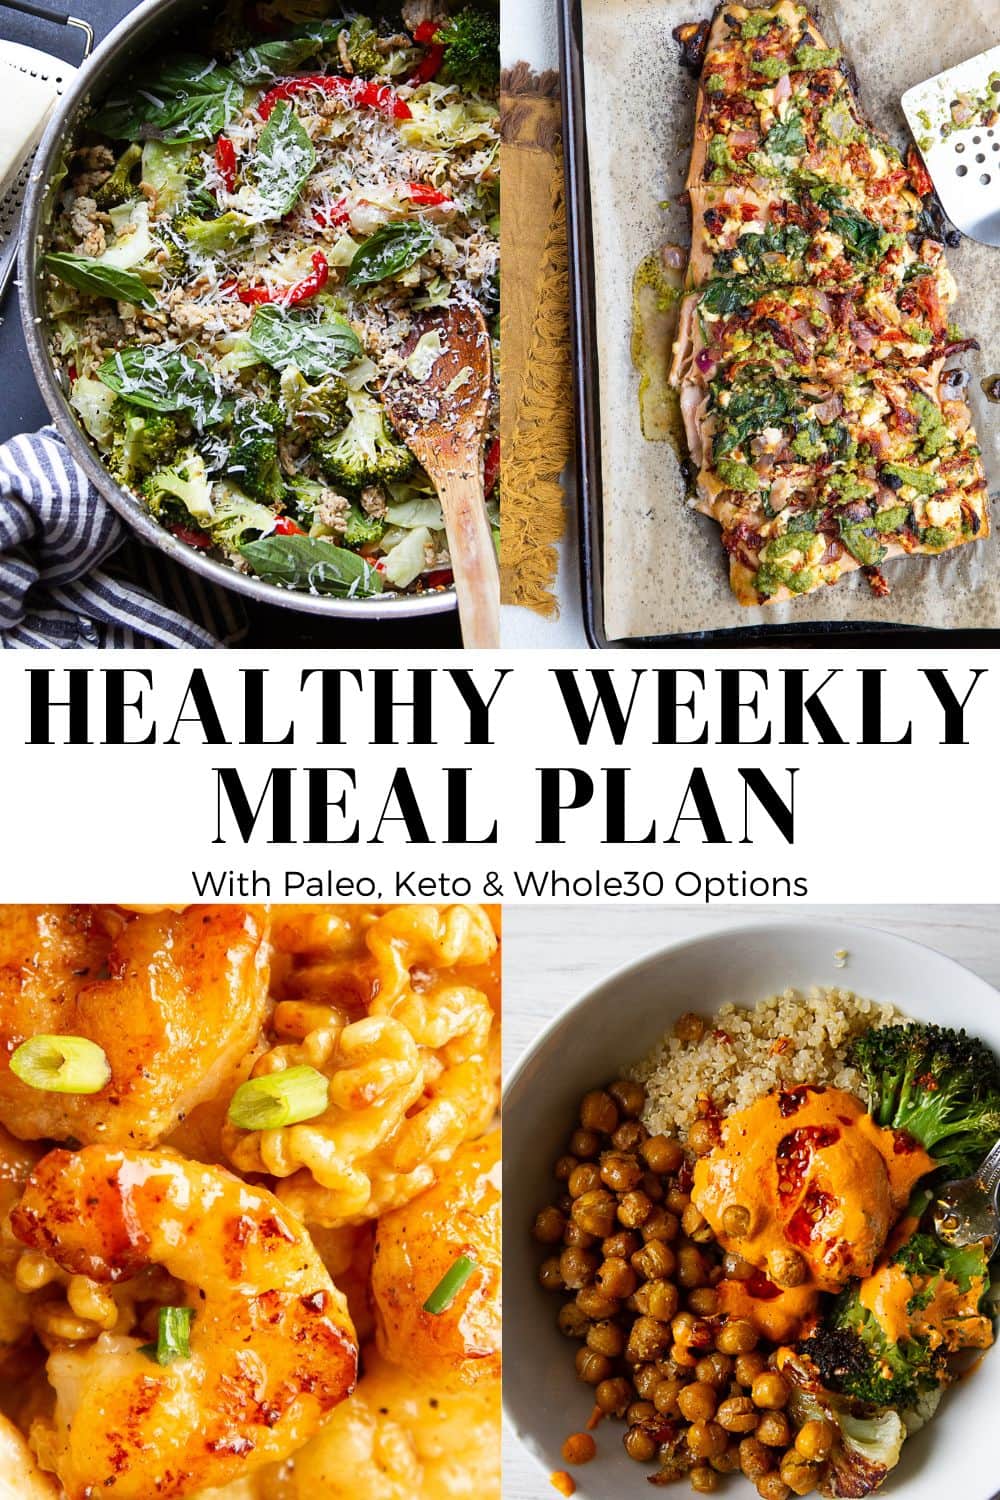 Healthy Weekly Meal Plan graphic for weekly meal plan 36